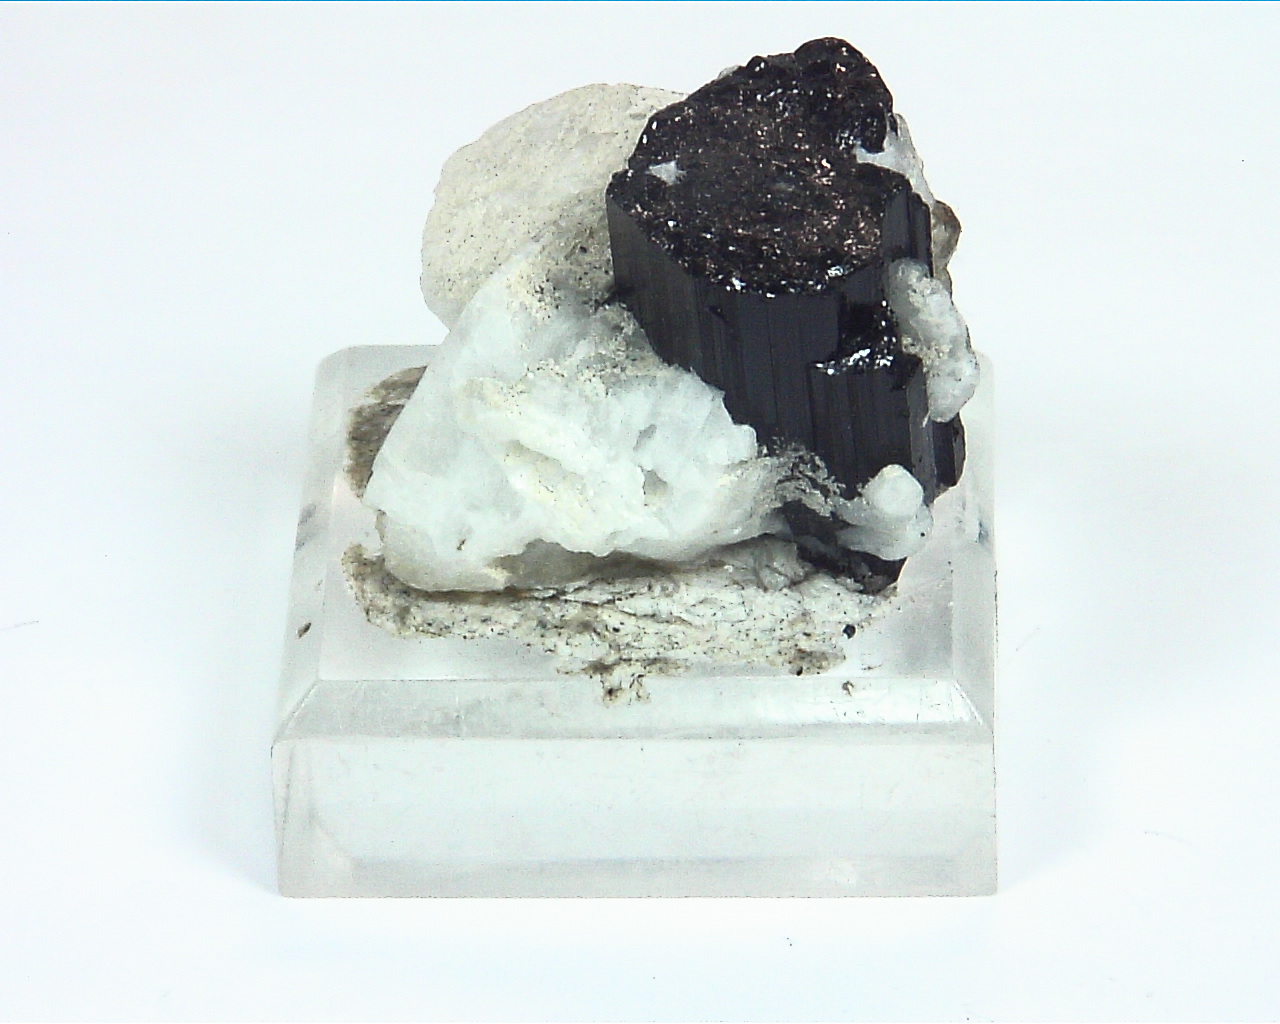 Quarts Crystal with Black Tourmaline Crystals,MS,786 8